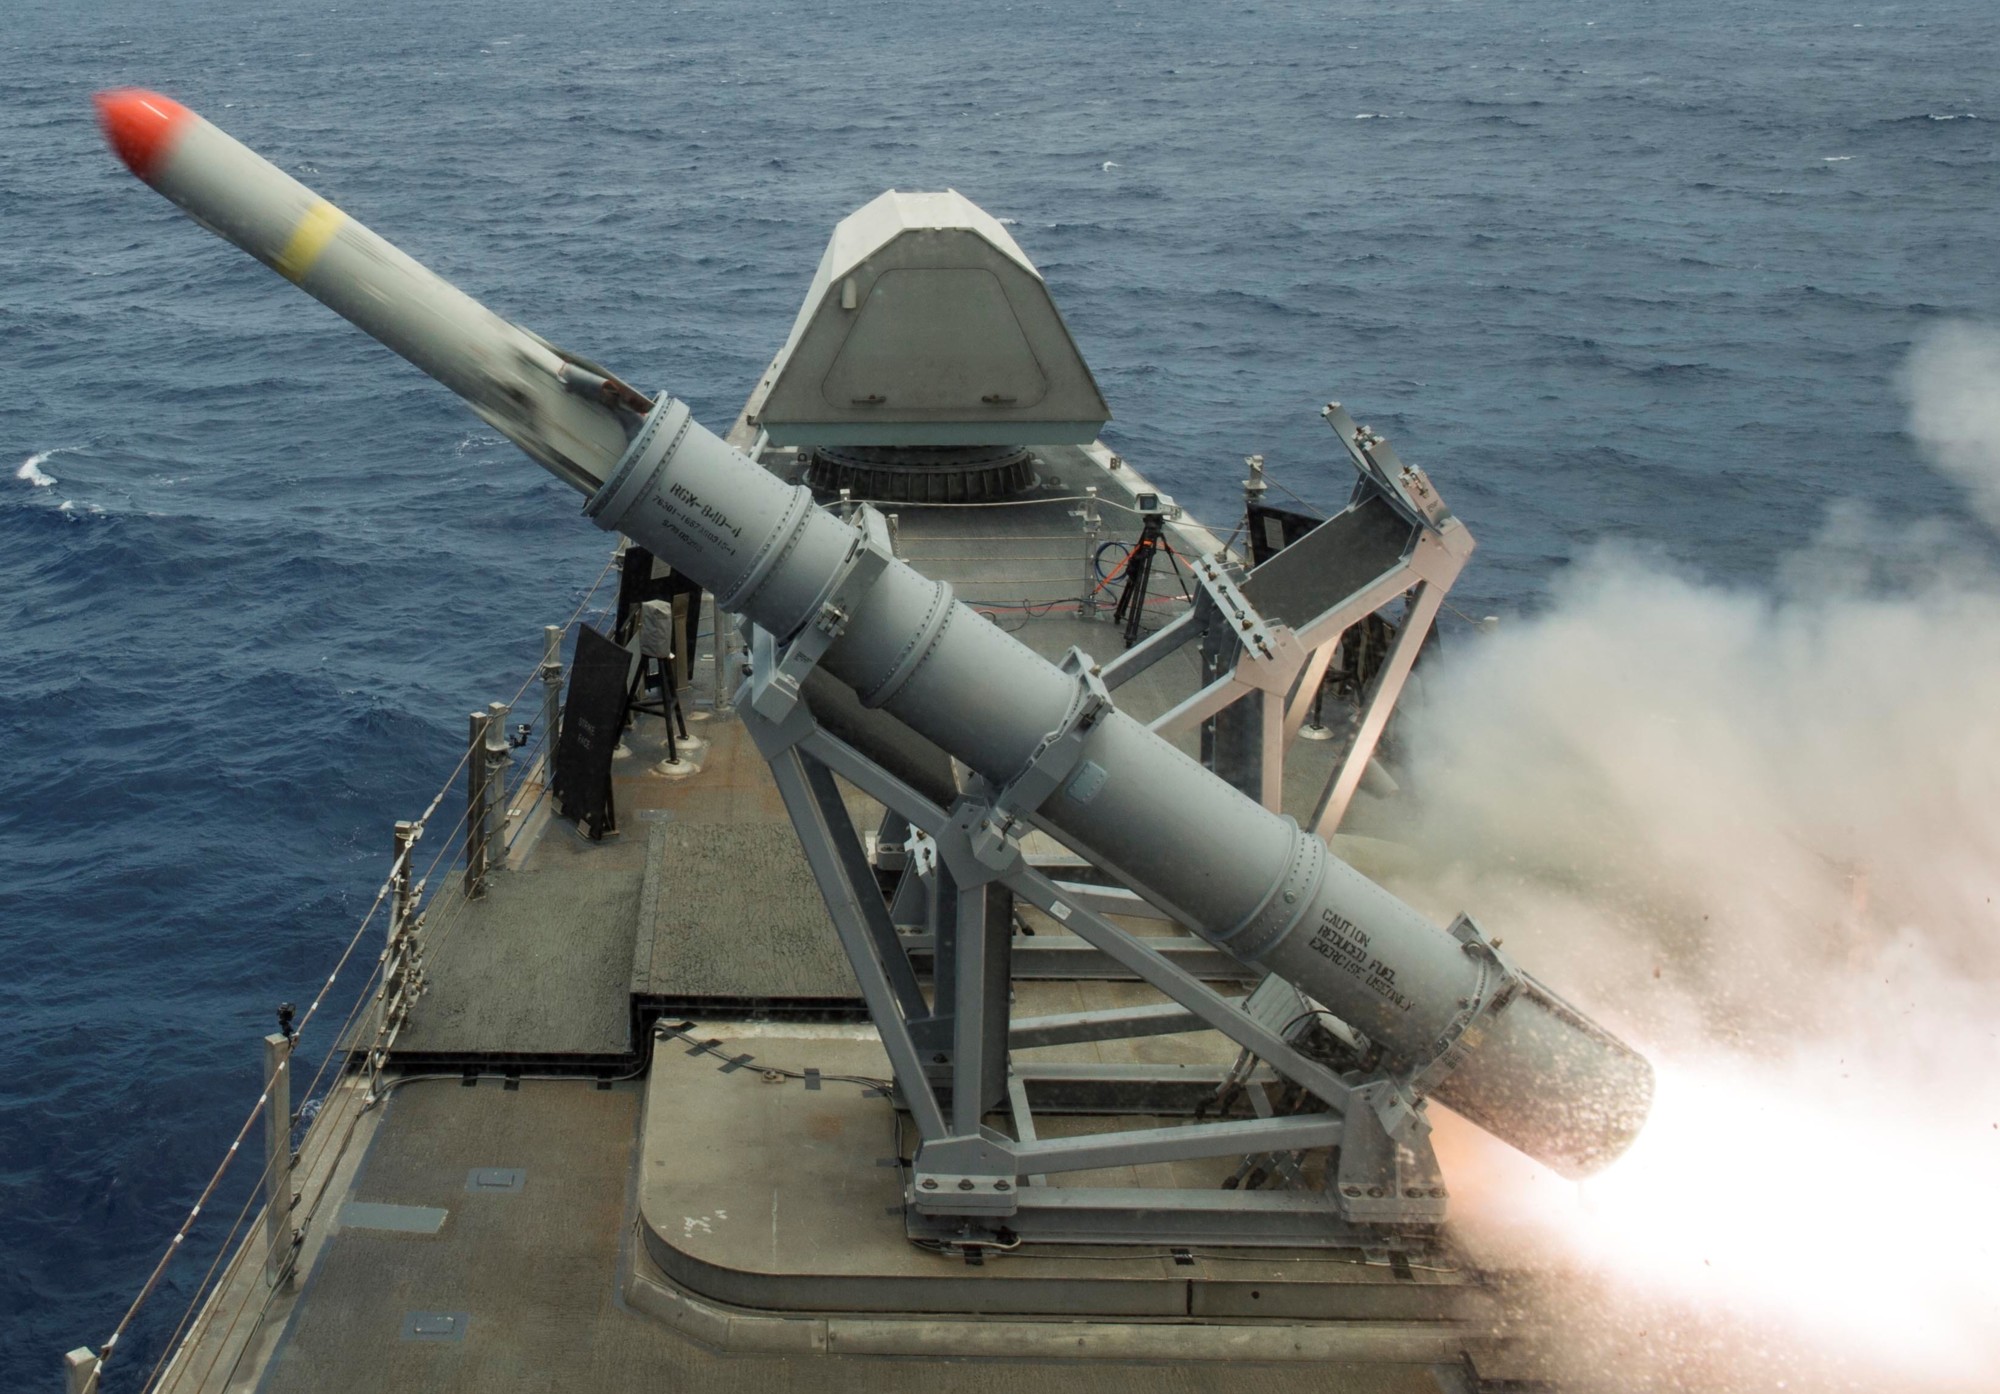 rgm-84 harpoon ssm mk-141 missile launcher independence class littoral combat ship lcs 47